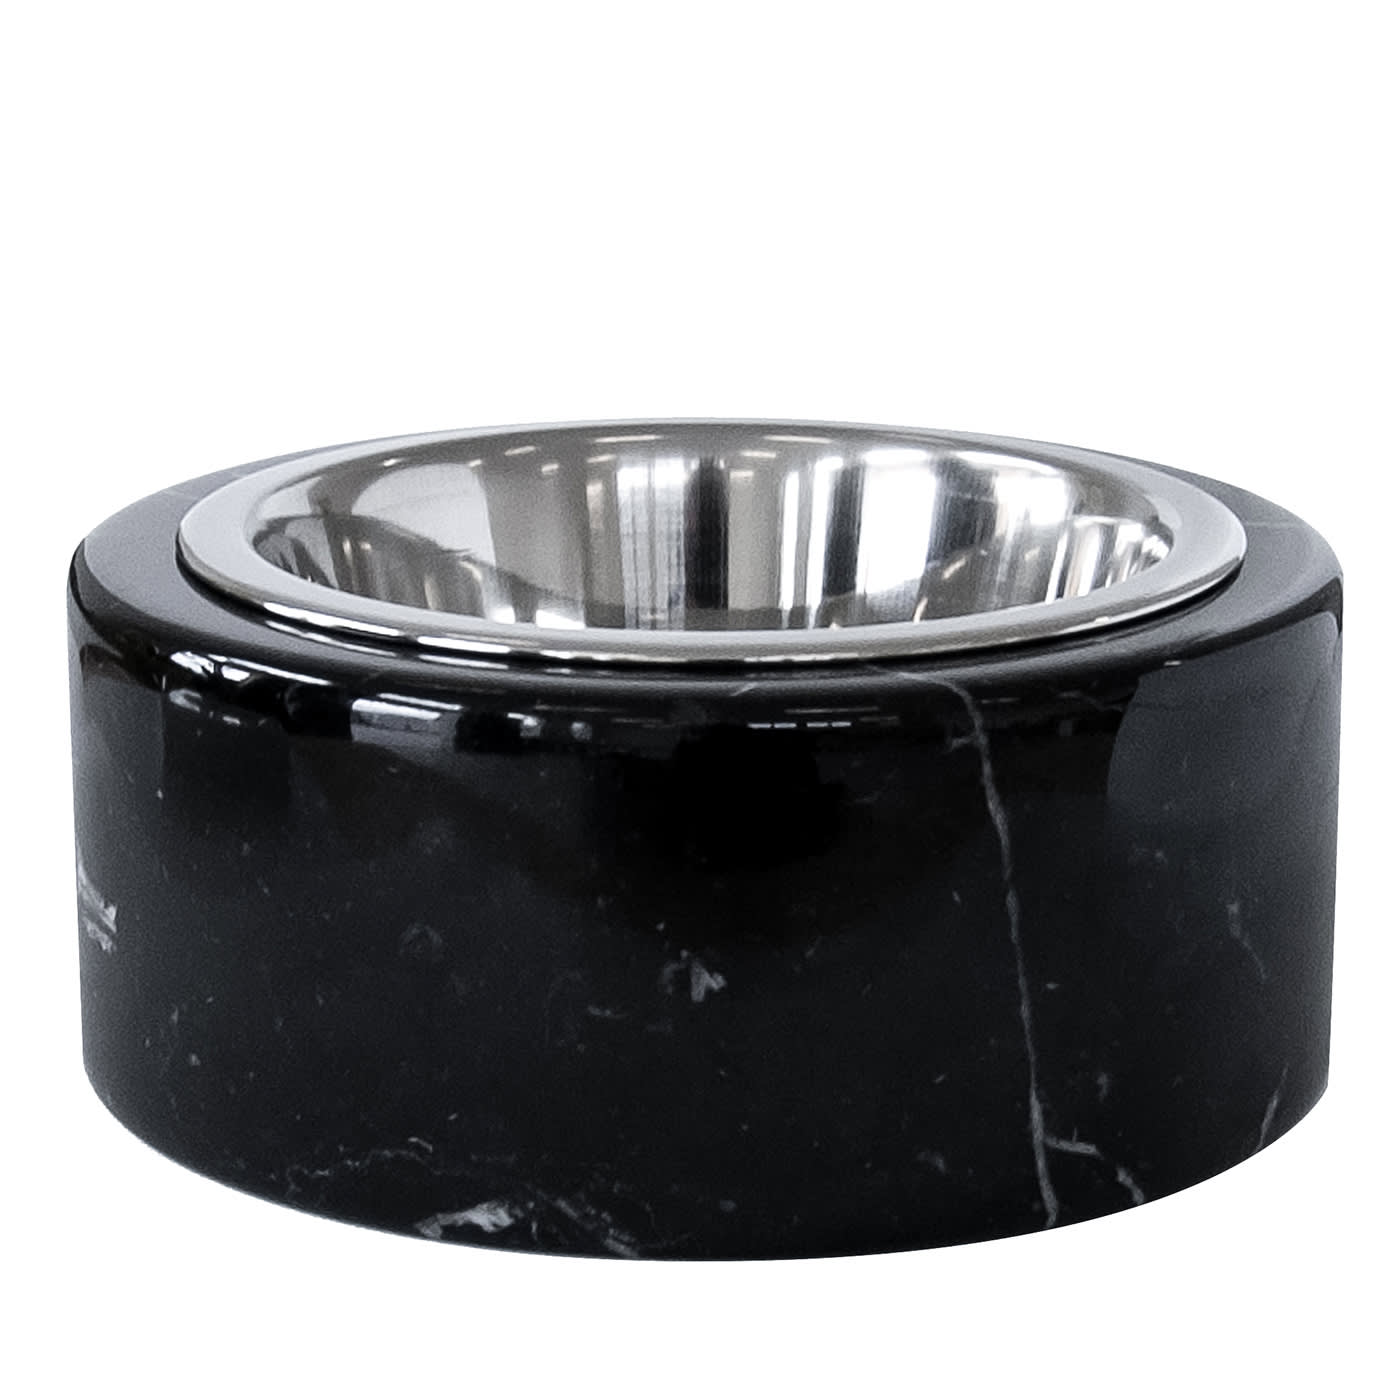 Black marble pet food bowl - FiammettaV Home Collection